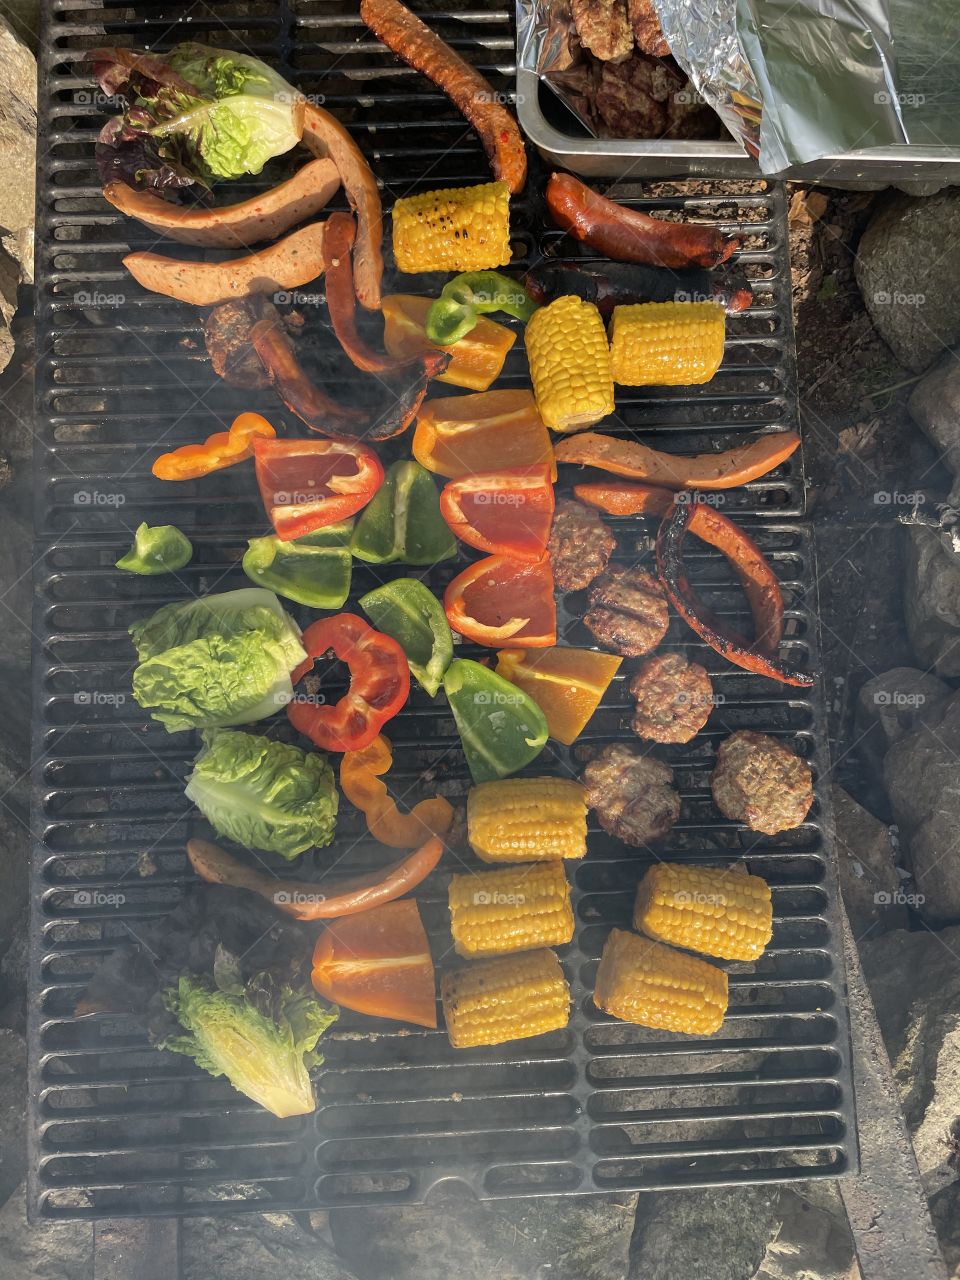 Barbeque vegetables and meat